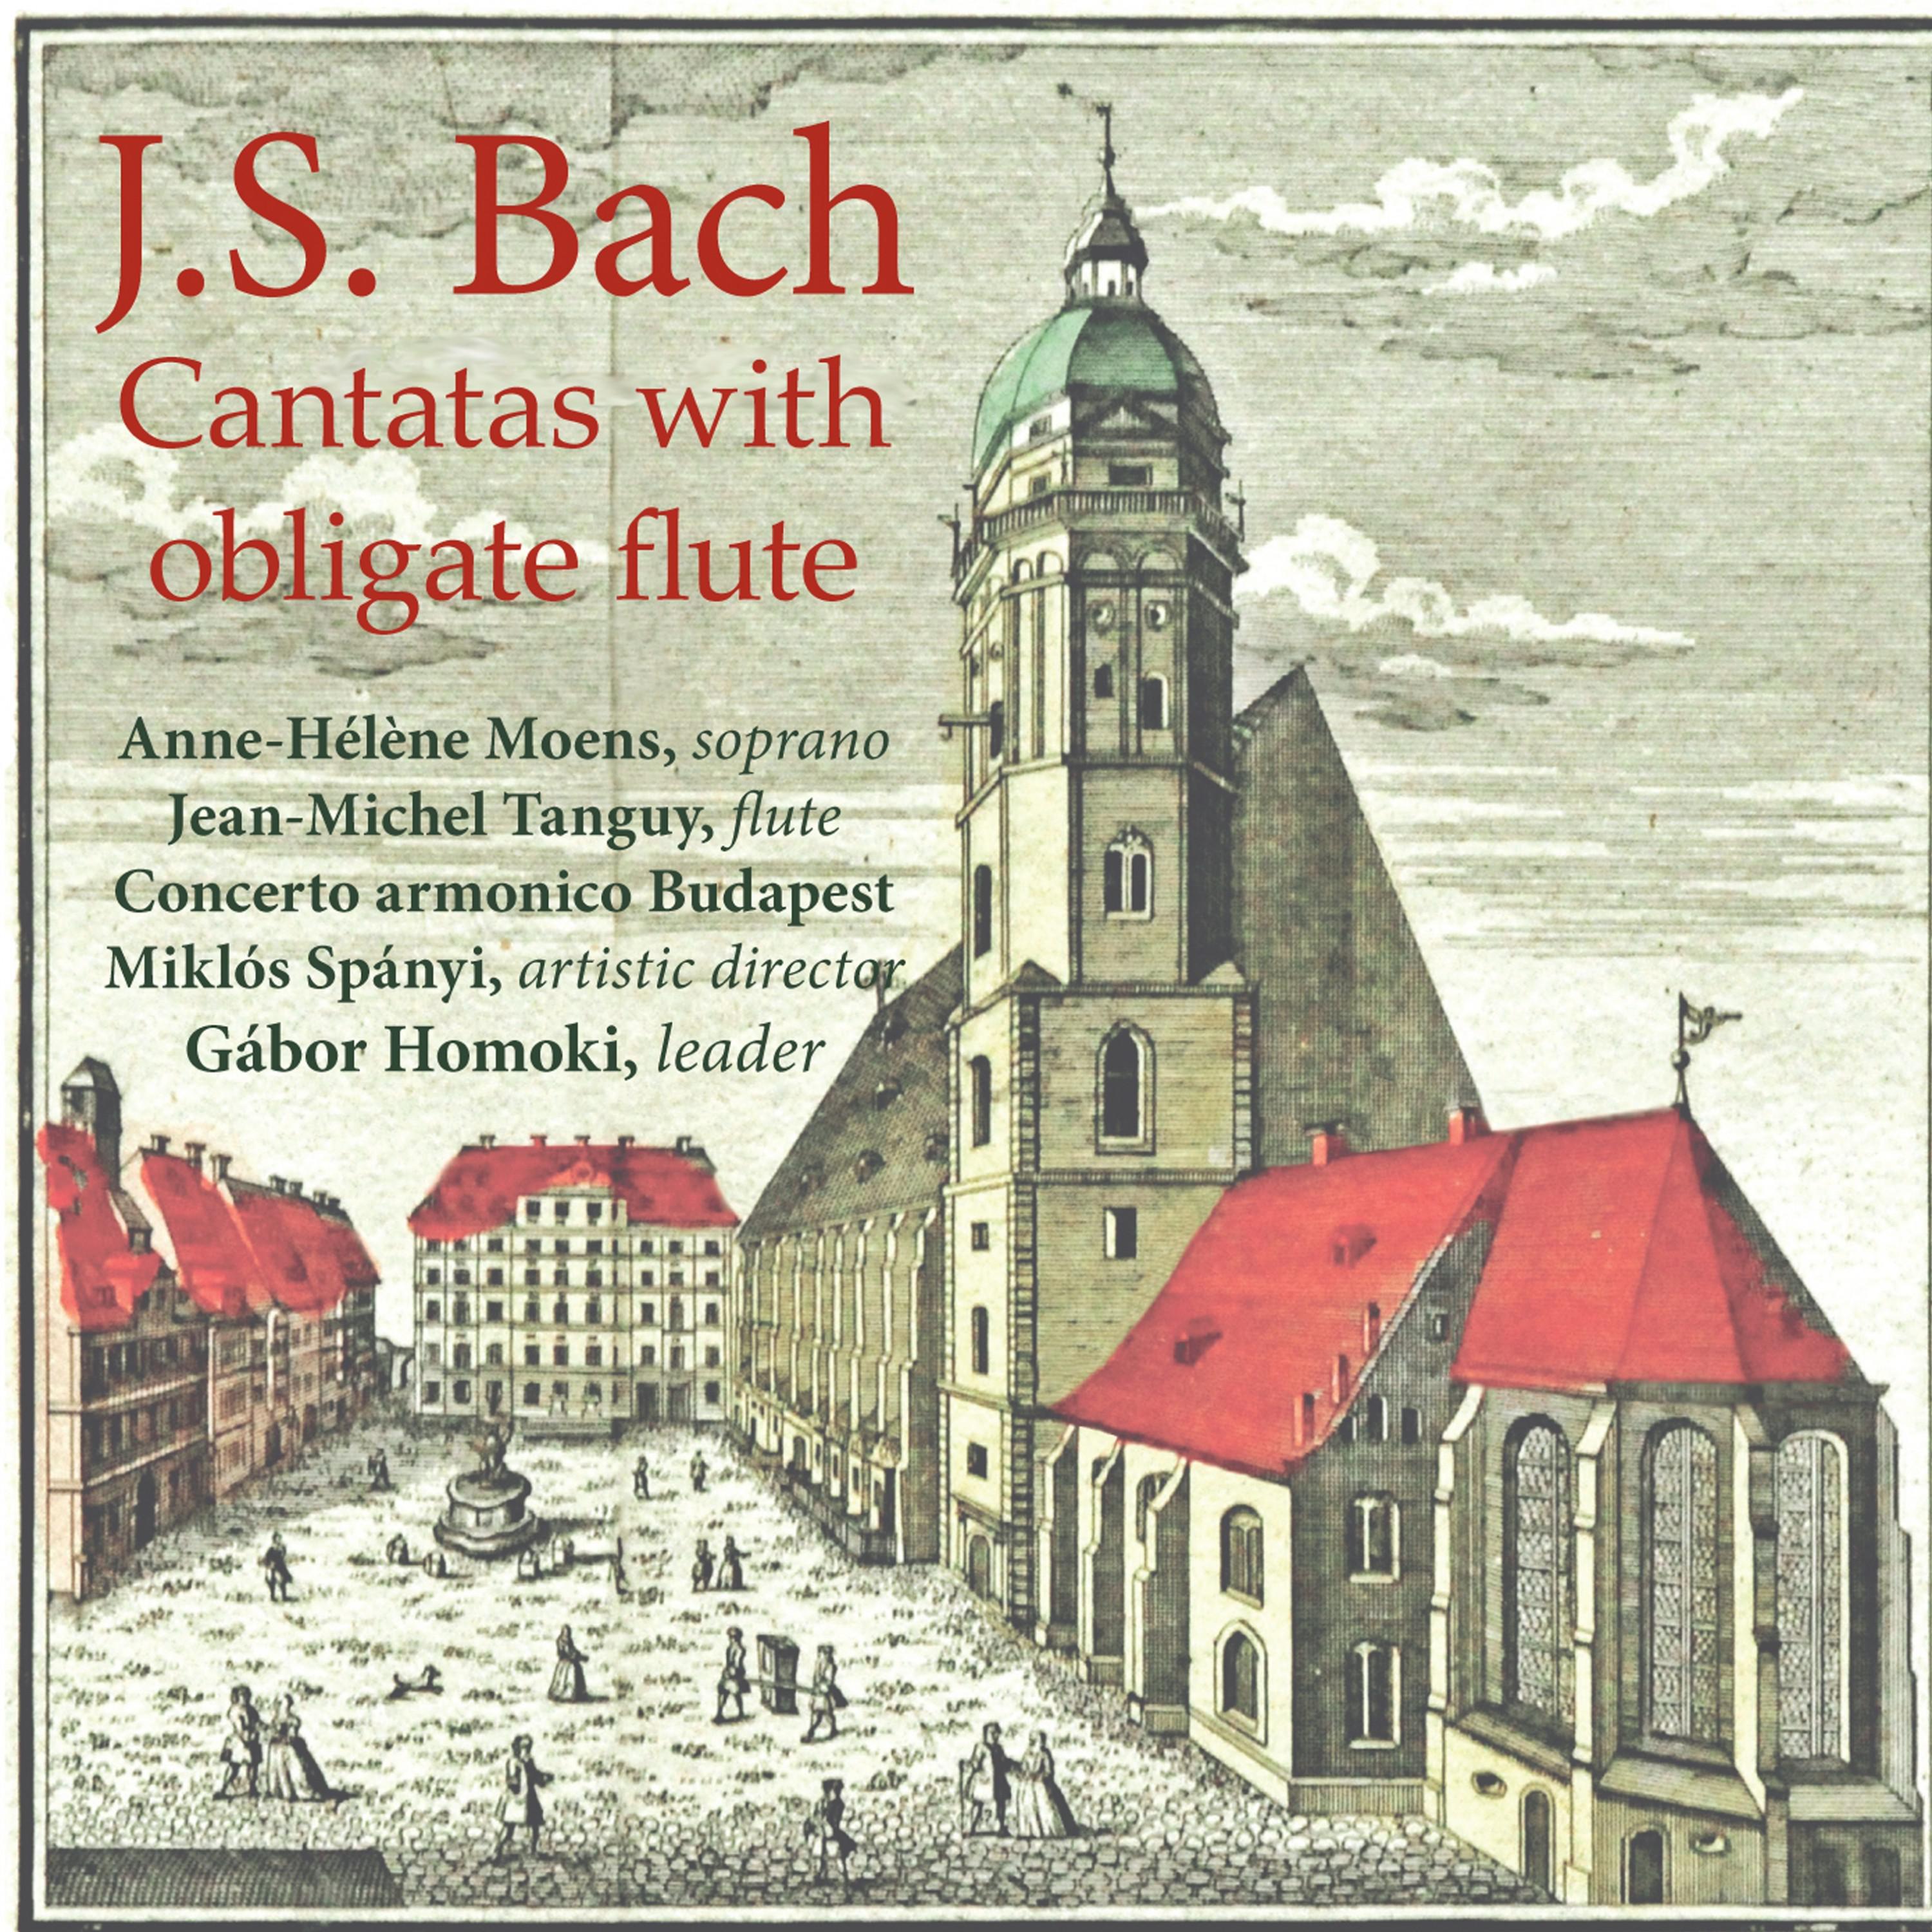 J.S. Bach: Cantatas with obligate Flute